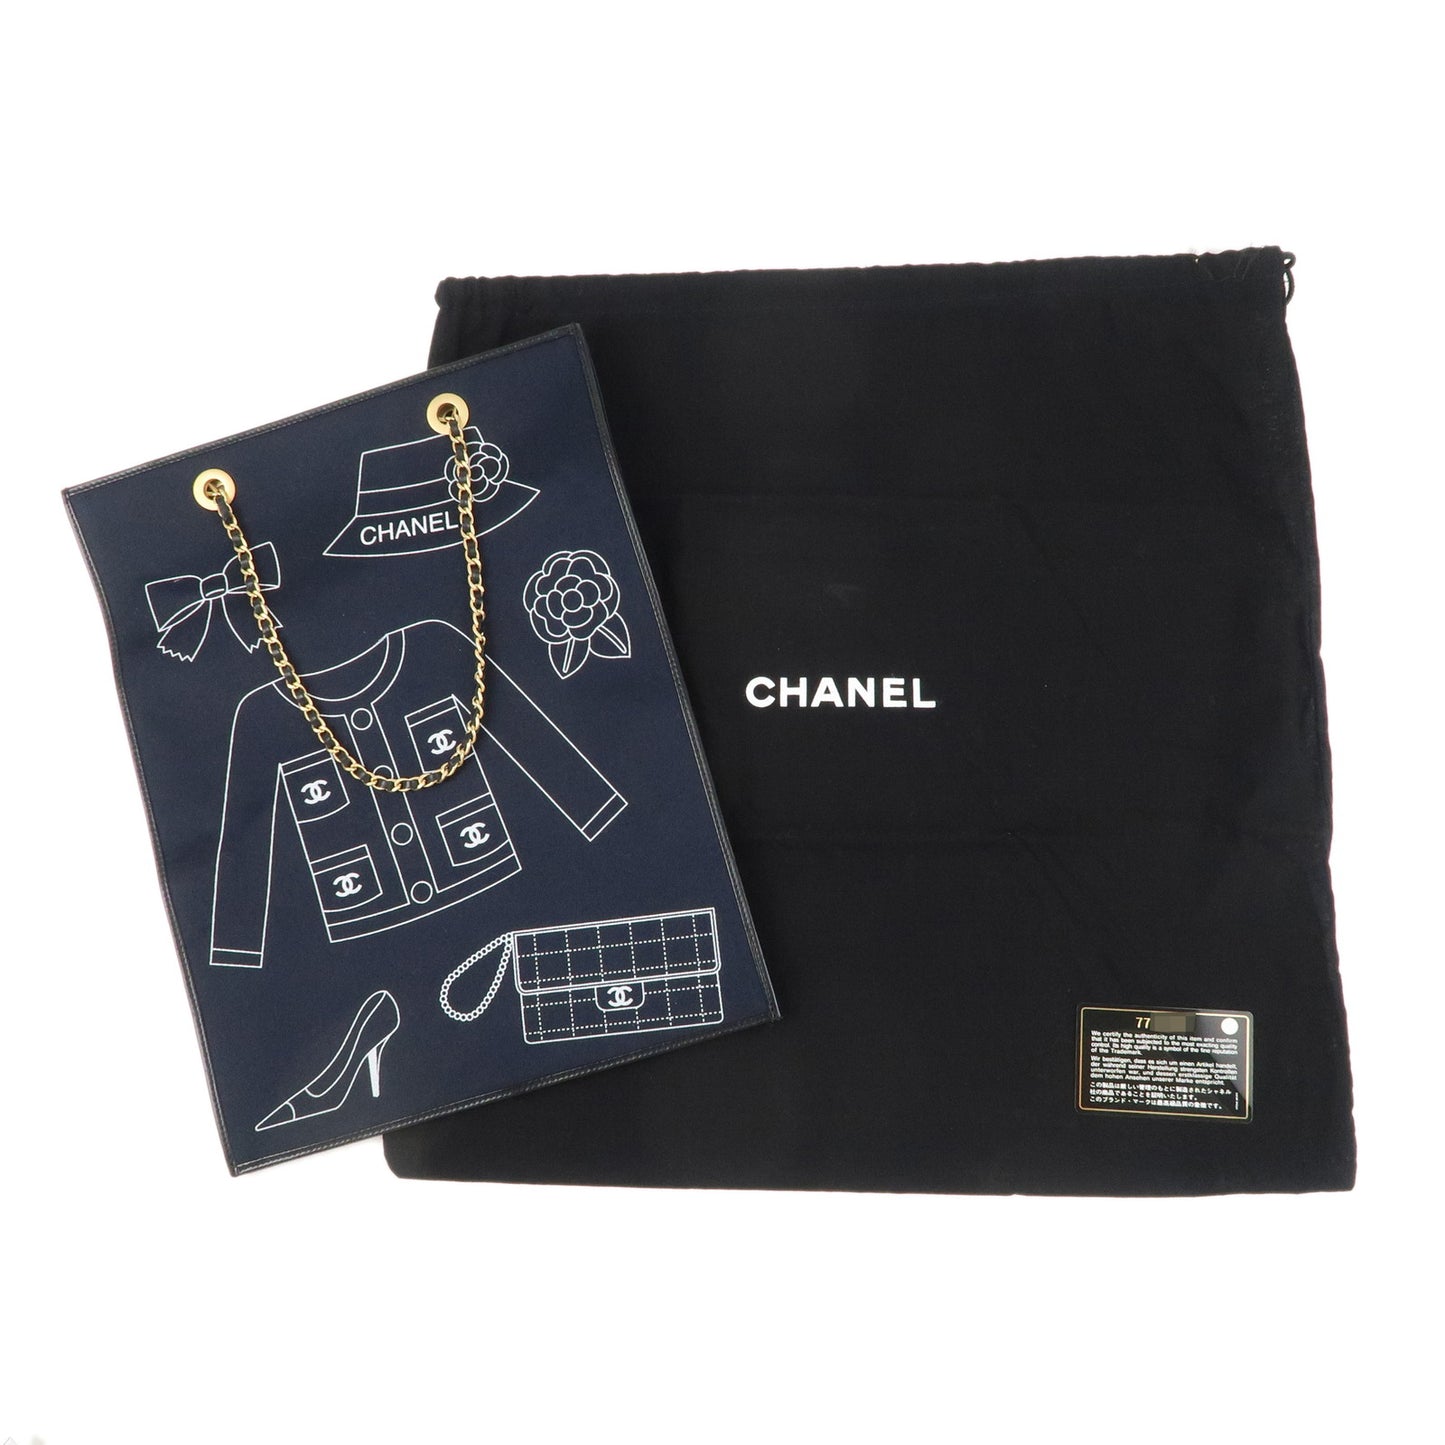 CHANEL Canvas Leather Iconic Chain Tote Bag Hand Bag Black